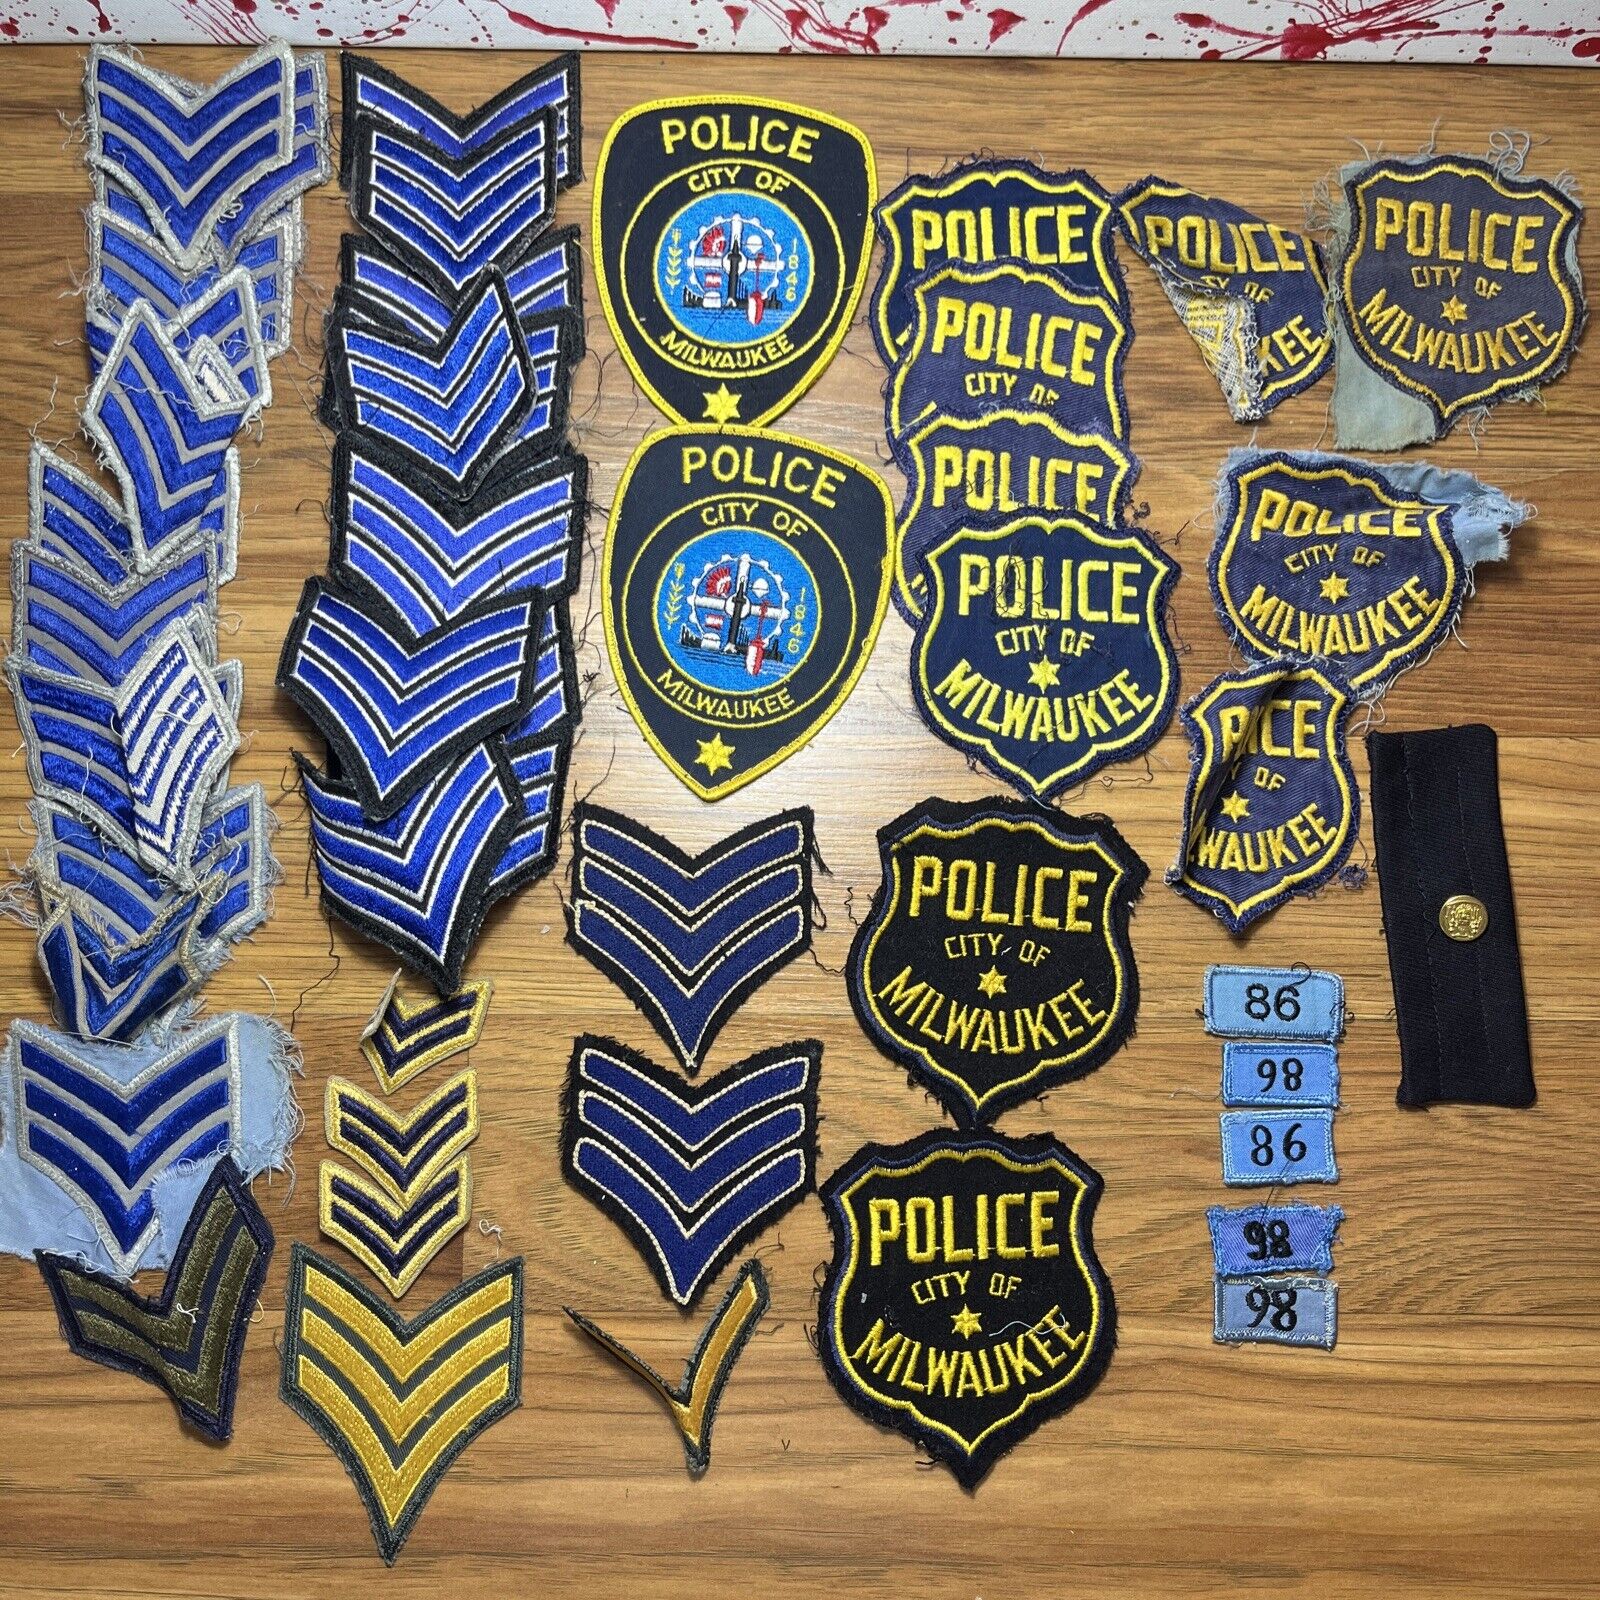 City Of Milwaukee Police Embroidered SHOULDER Patch Lot Obsolete Vintage